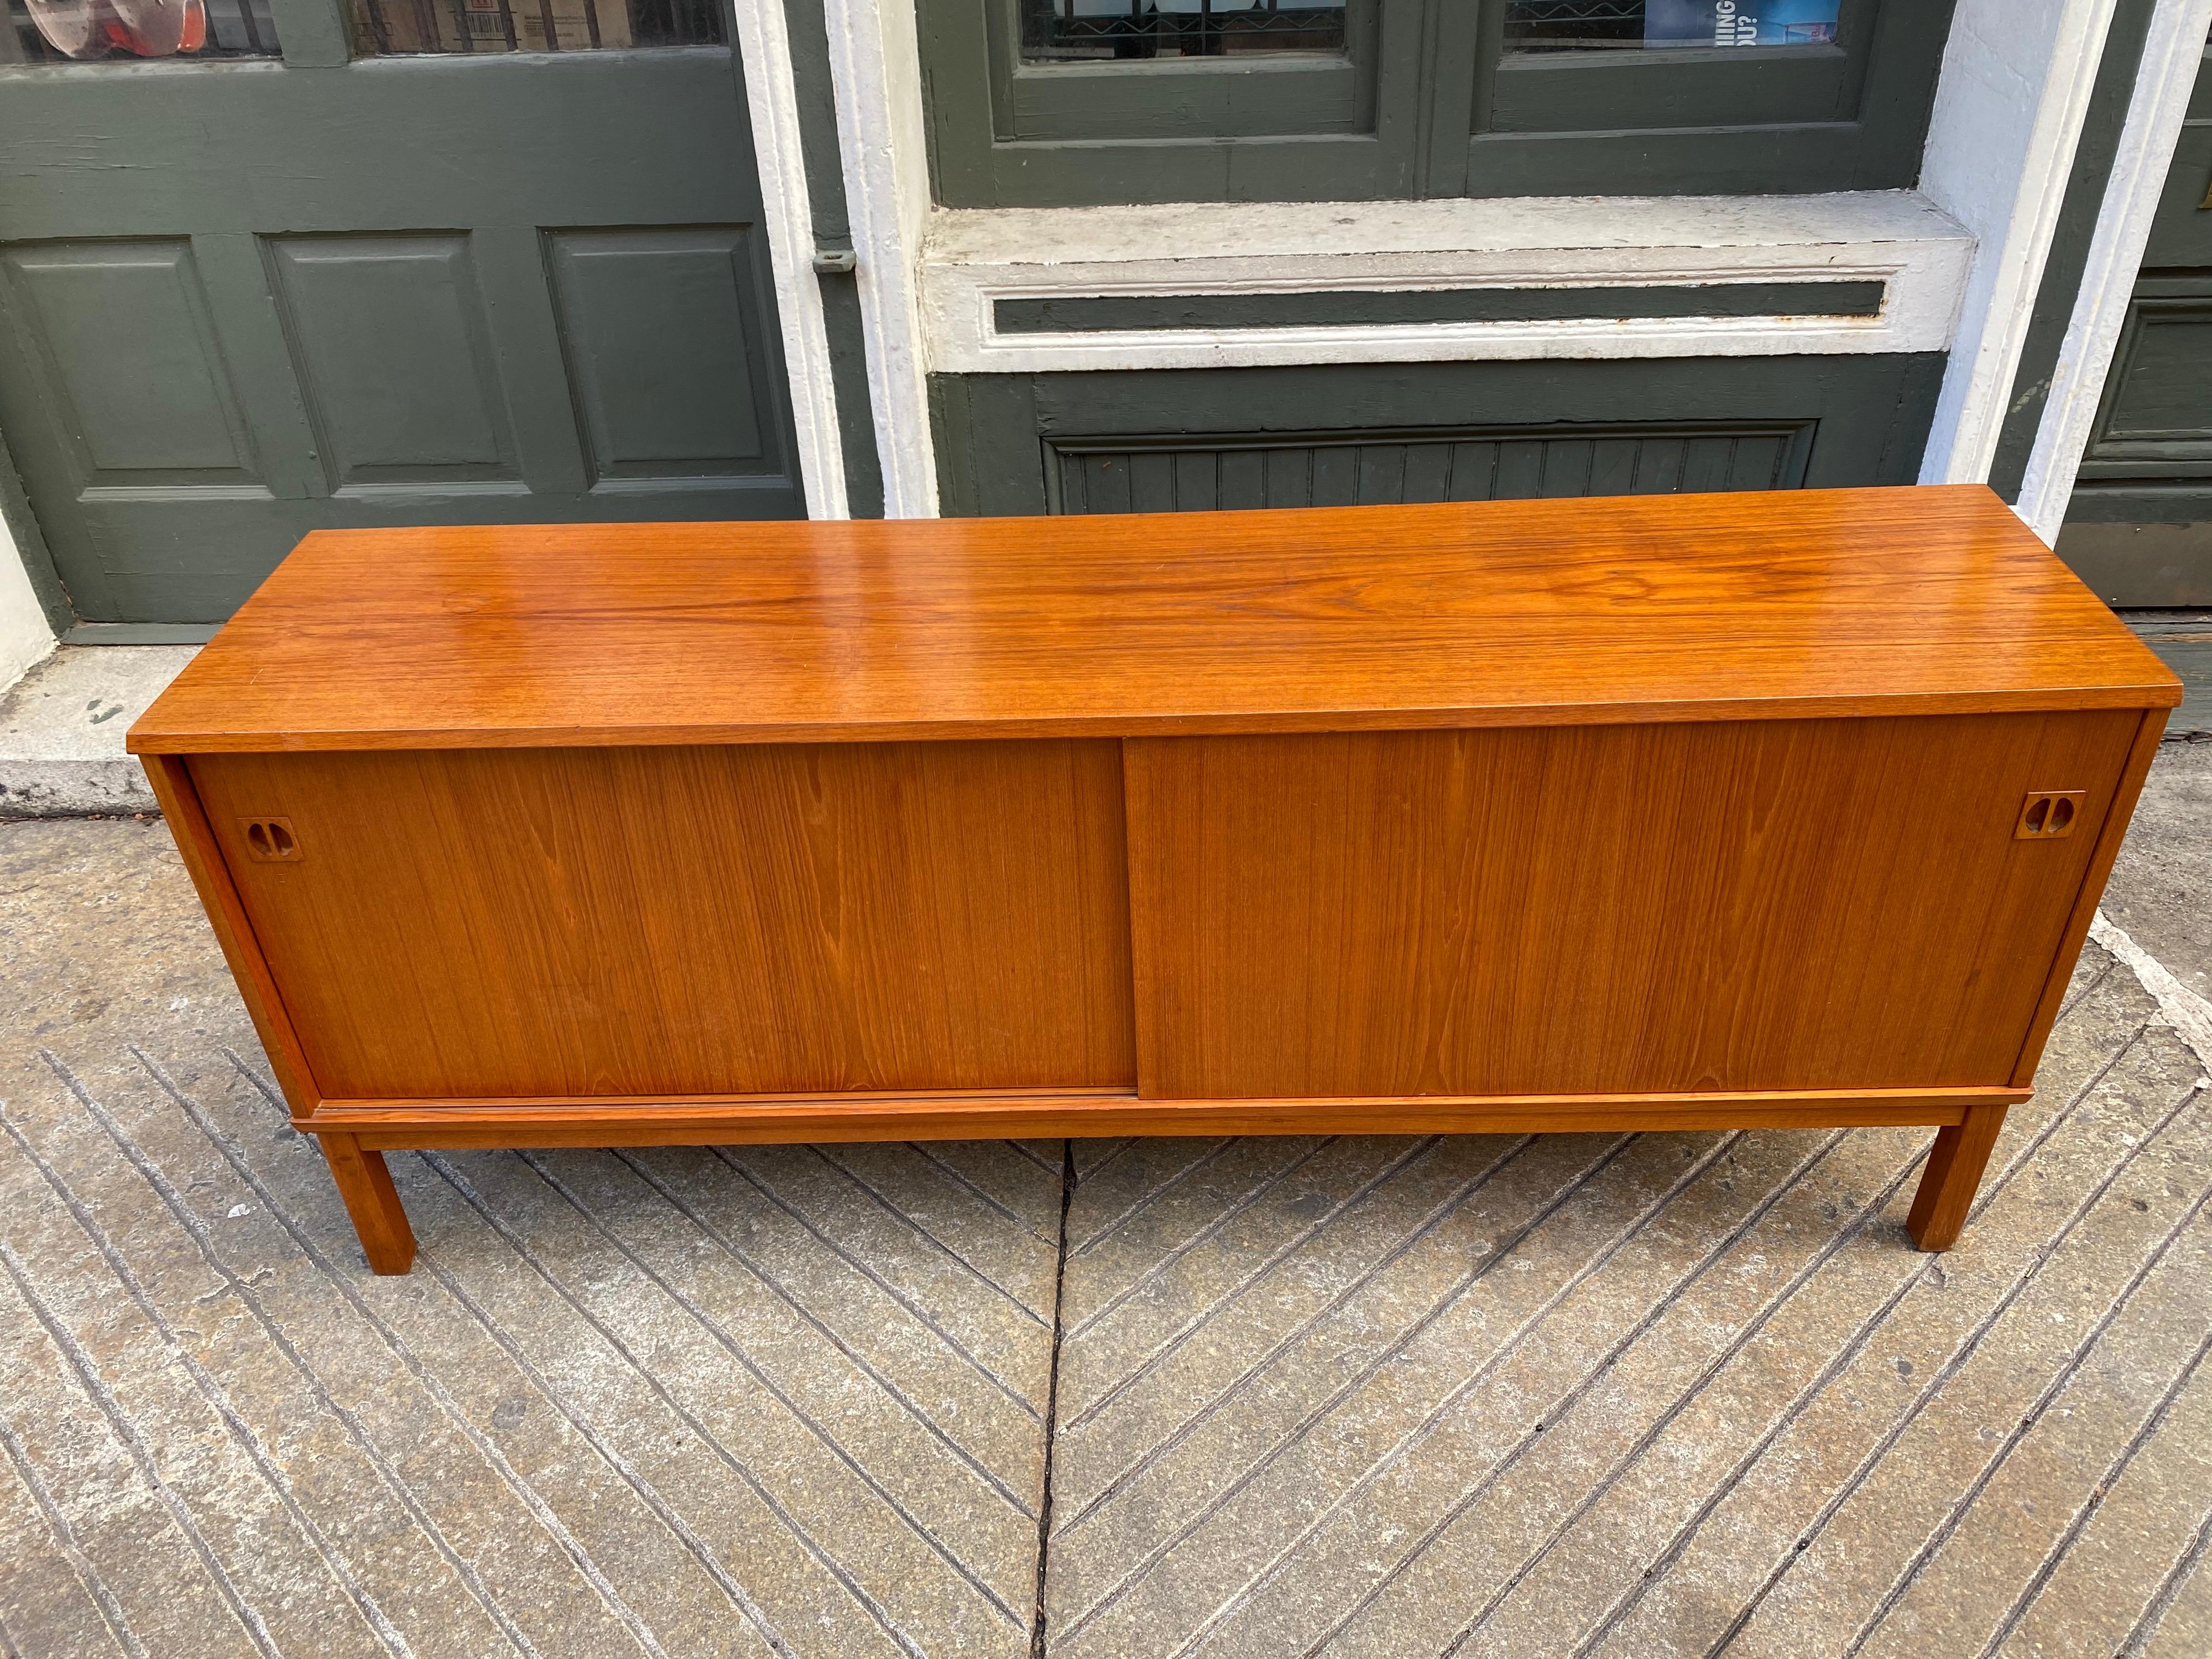 Danish 2-door teak credenza. Nice scale and size! Original finish, shows normal signs of use, see photos for top wear. Overall presents very well! Two small pull out drawers. Measures: 16.5